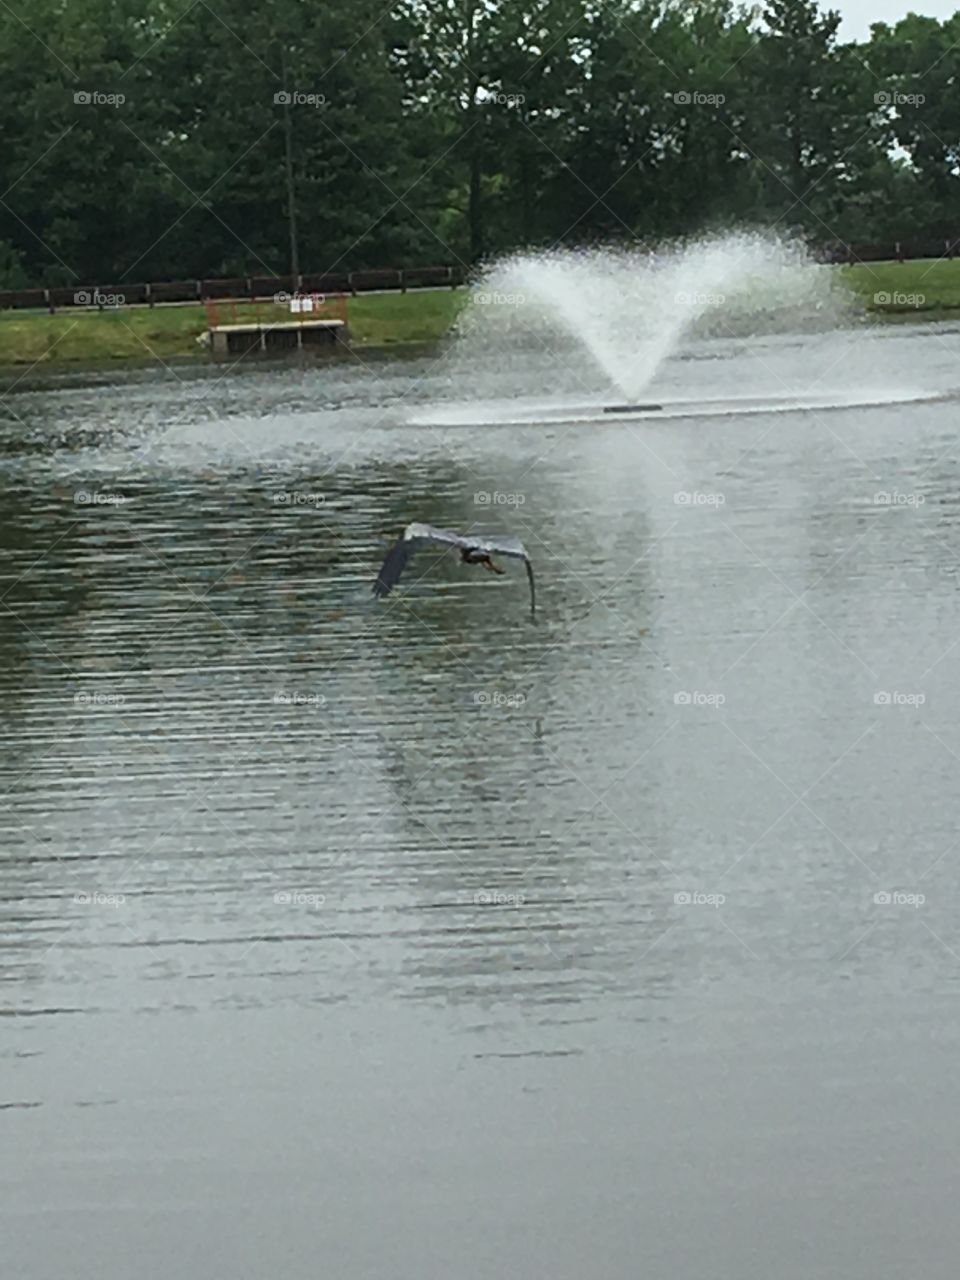 Heron flying with a fountain in the background